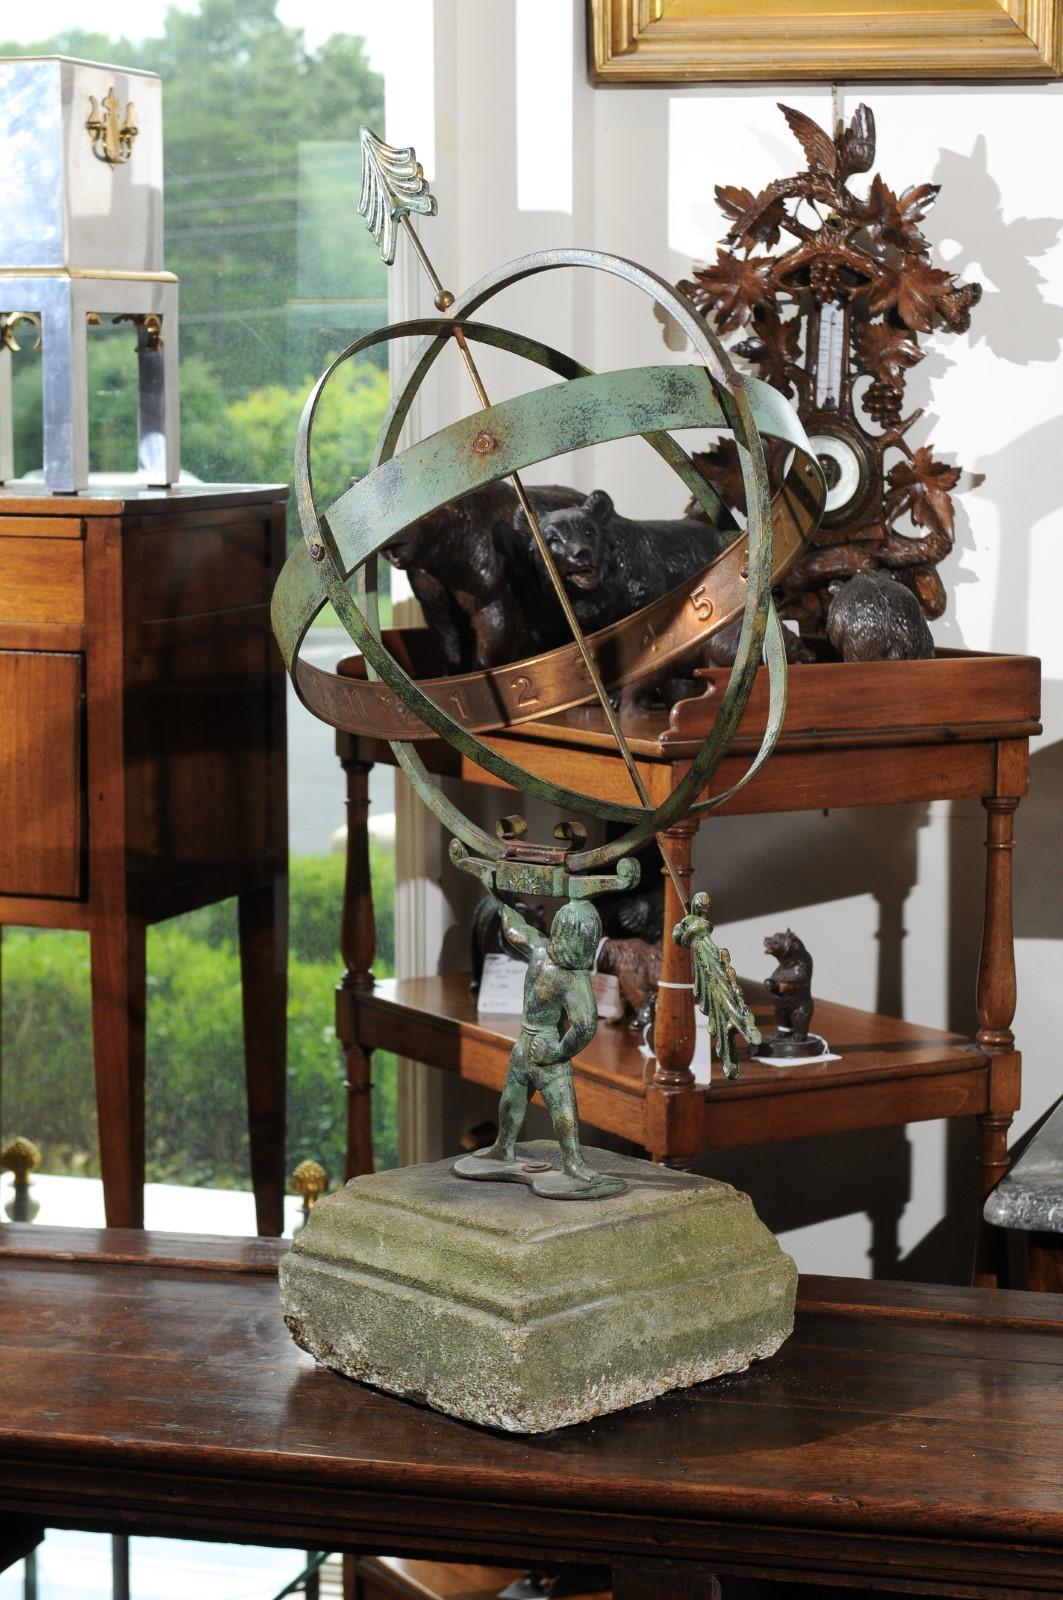 A Swedish vintage copper armillary from the mid-20th century, depicting Atlas carrying the world. Born in Sweden during the midcentury period, this exquisite armillary depicts the famed Titan Atlas, condemned to carry the sky on his shoulders for